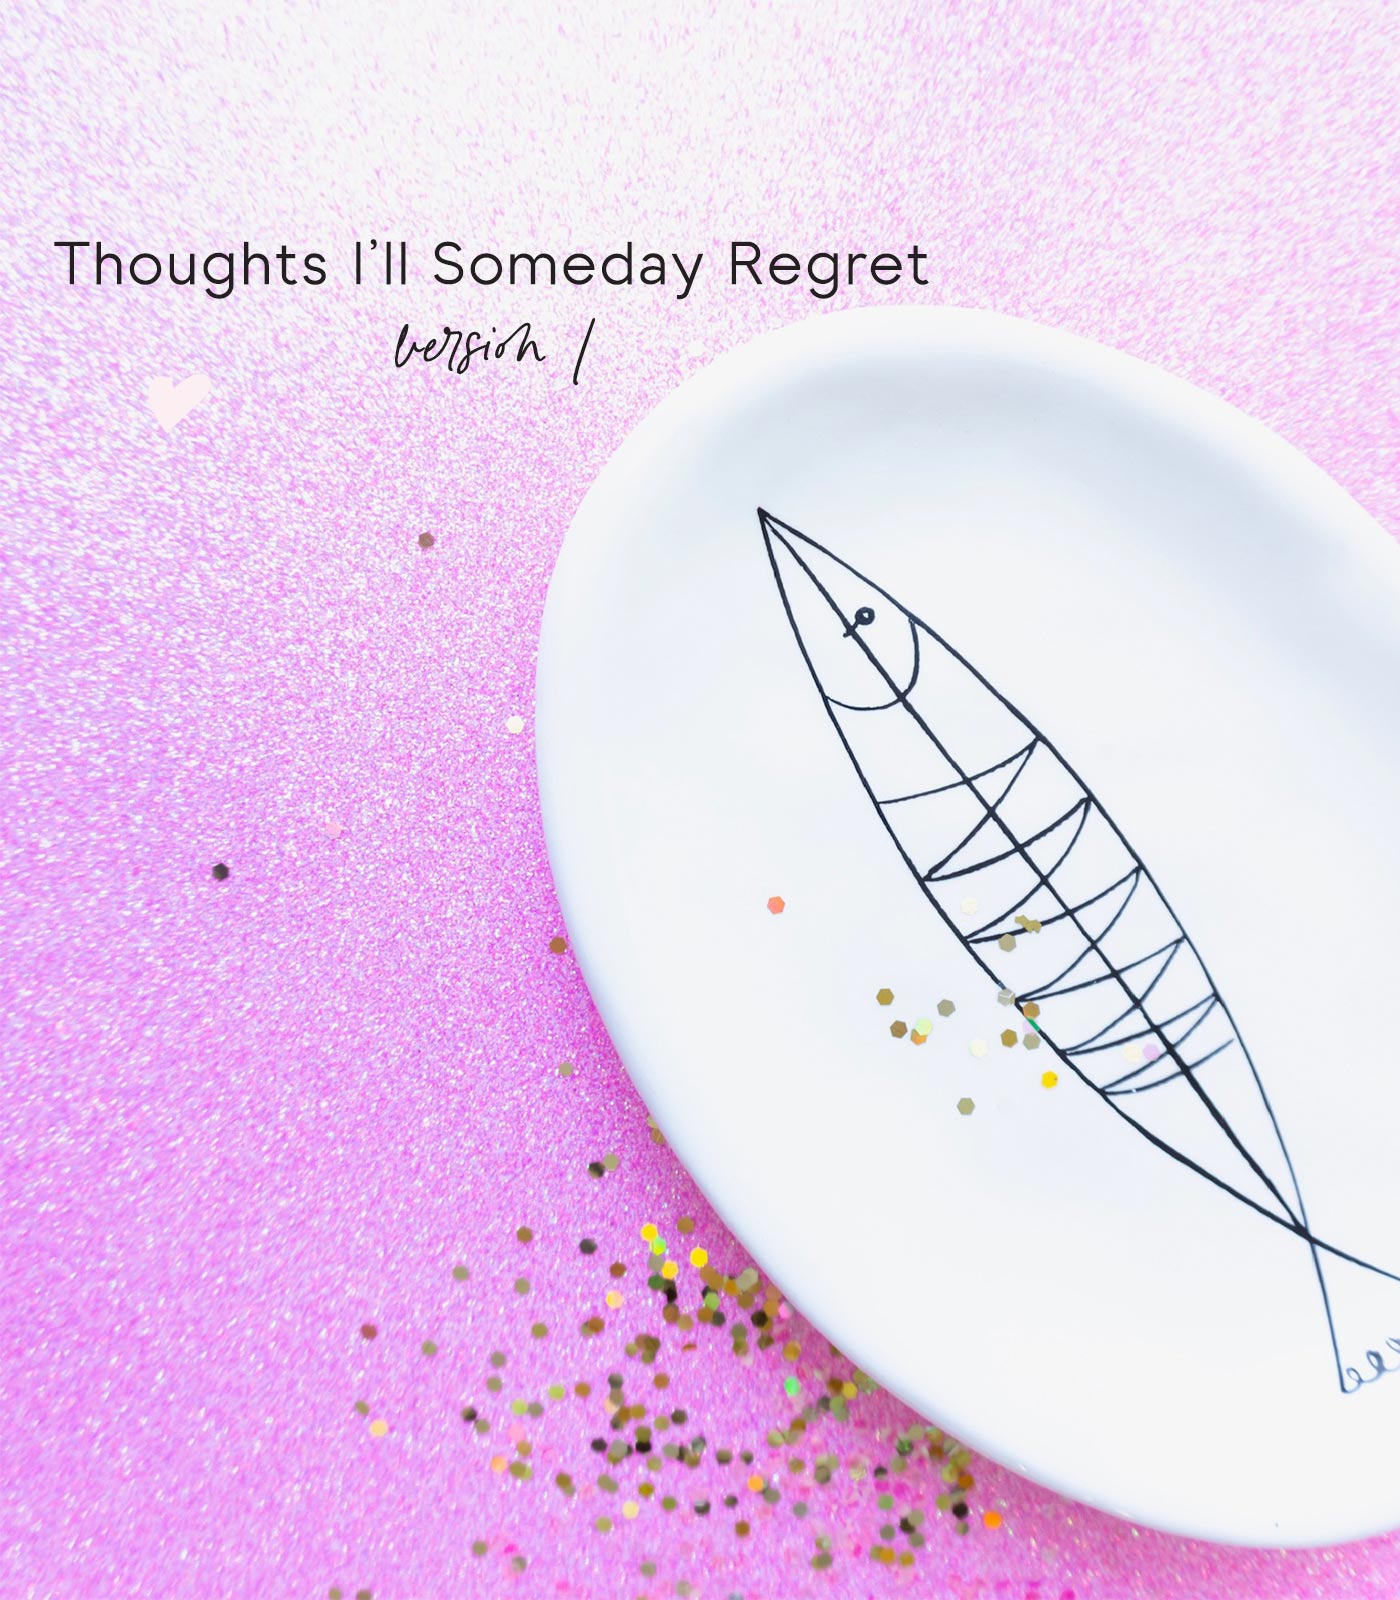 Thoughts-Ill-someday-regret